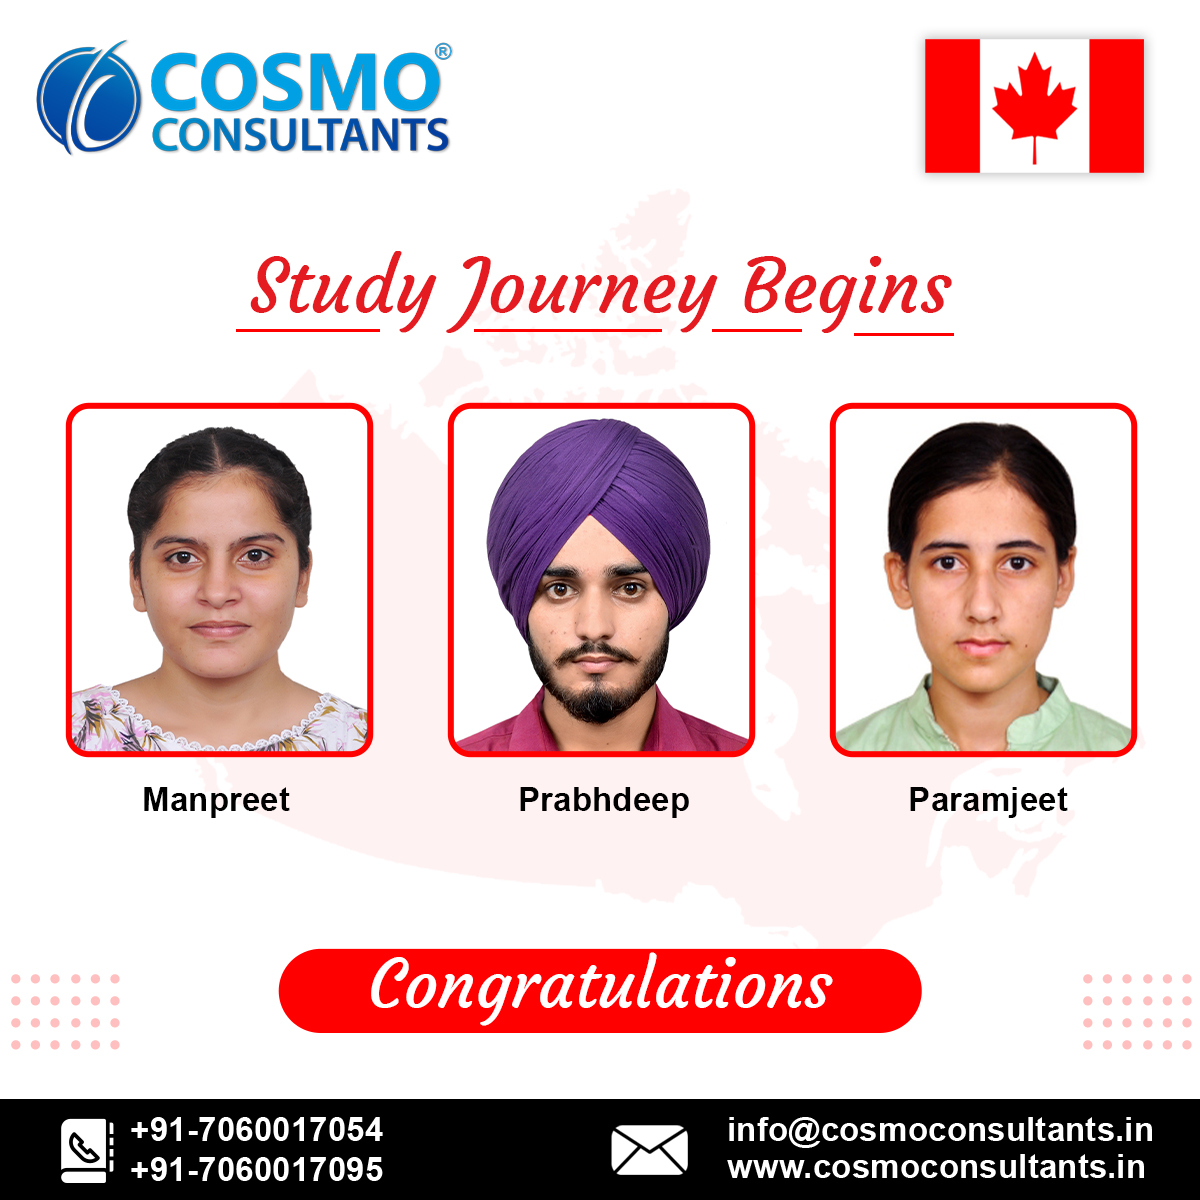 Team Cosmo Congratulates all these students and wishes them a Bright and Successful future. For more information reach us: +91-7060017054, +91-7060017095. #CosmoConsultants #Canada #StudyInCanada #StudyAbroad #studentvisa #studyvisa #canadavisa #education #canadaimmigration